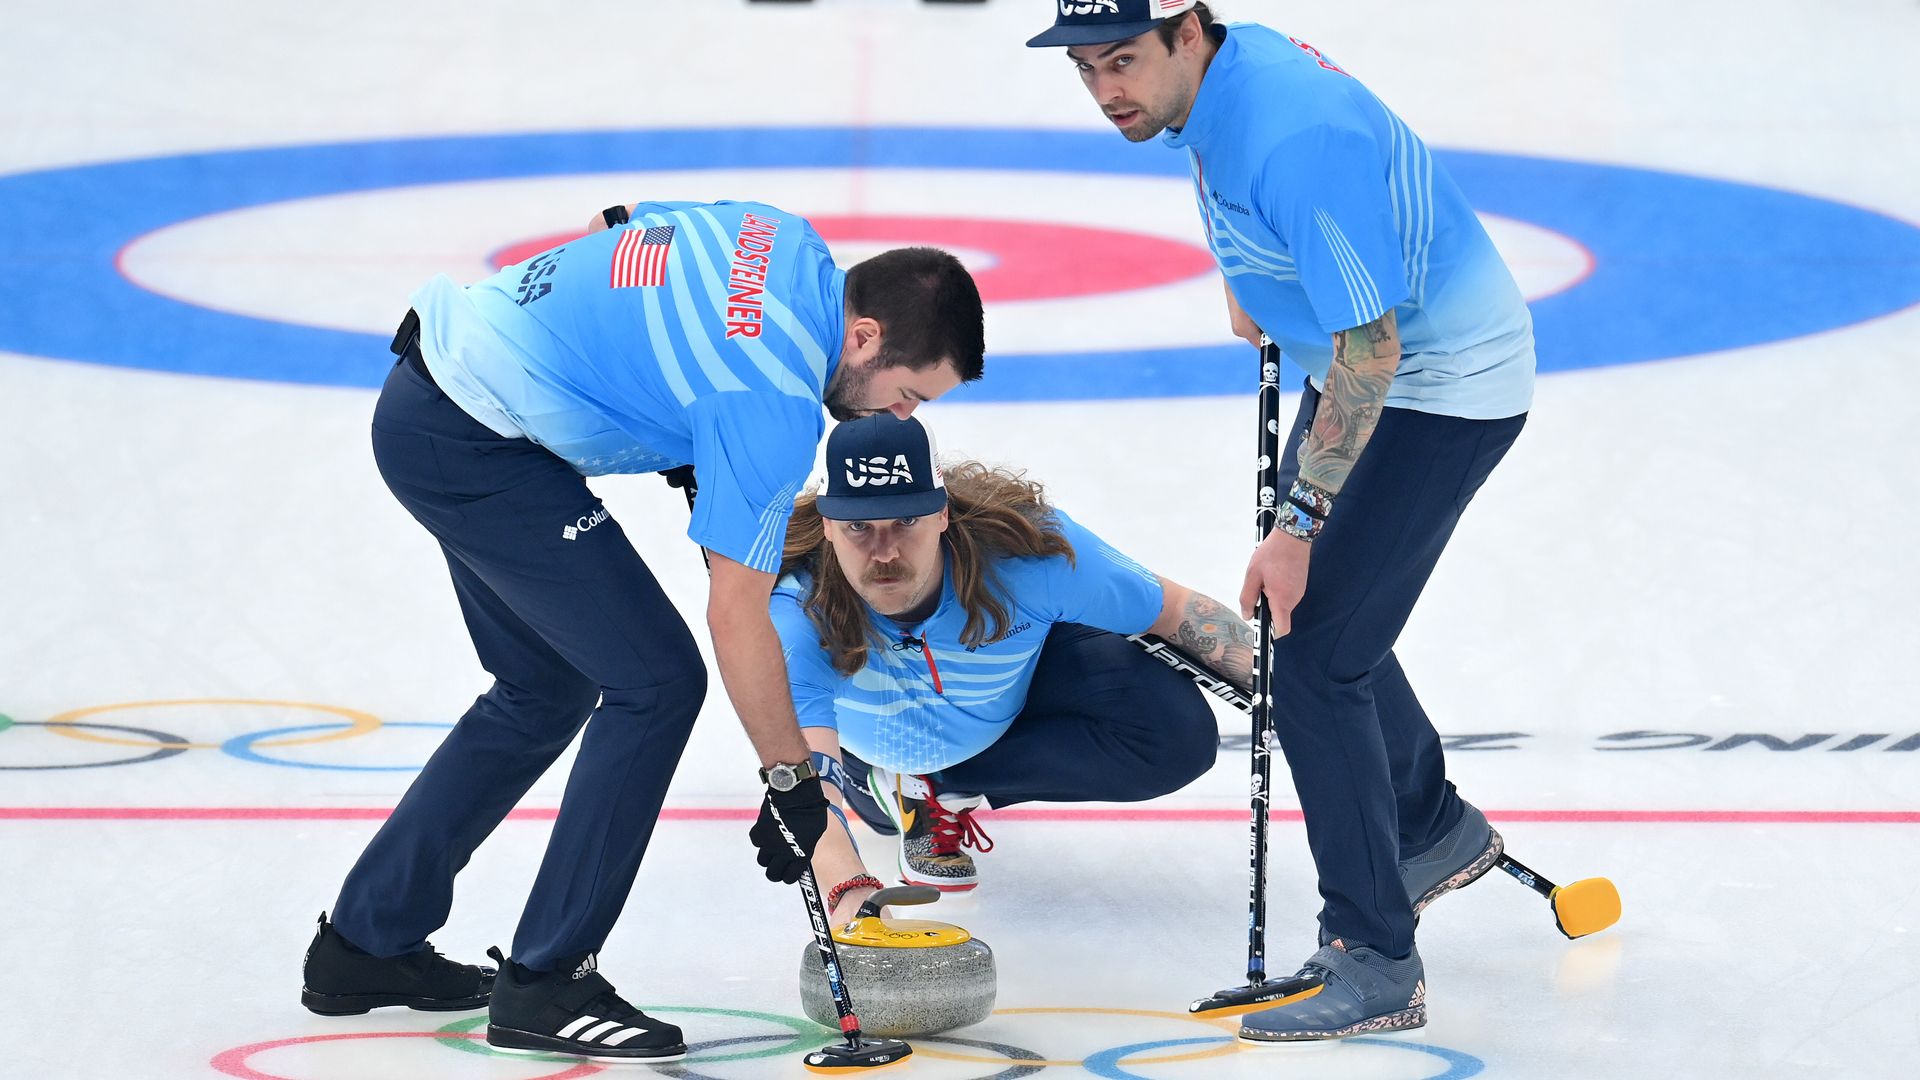 The U.S. curling team plays a shot at the Beijing 2022 Winter Olympic Games on February 17, 2022 in Beijing, China. 